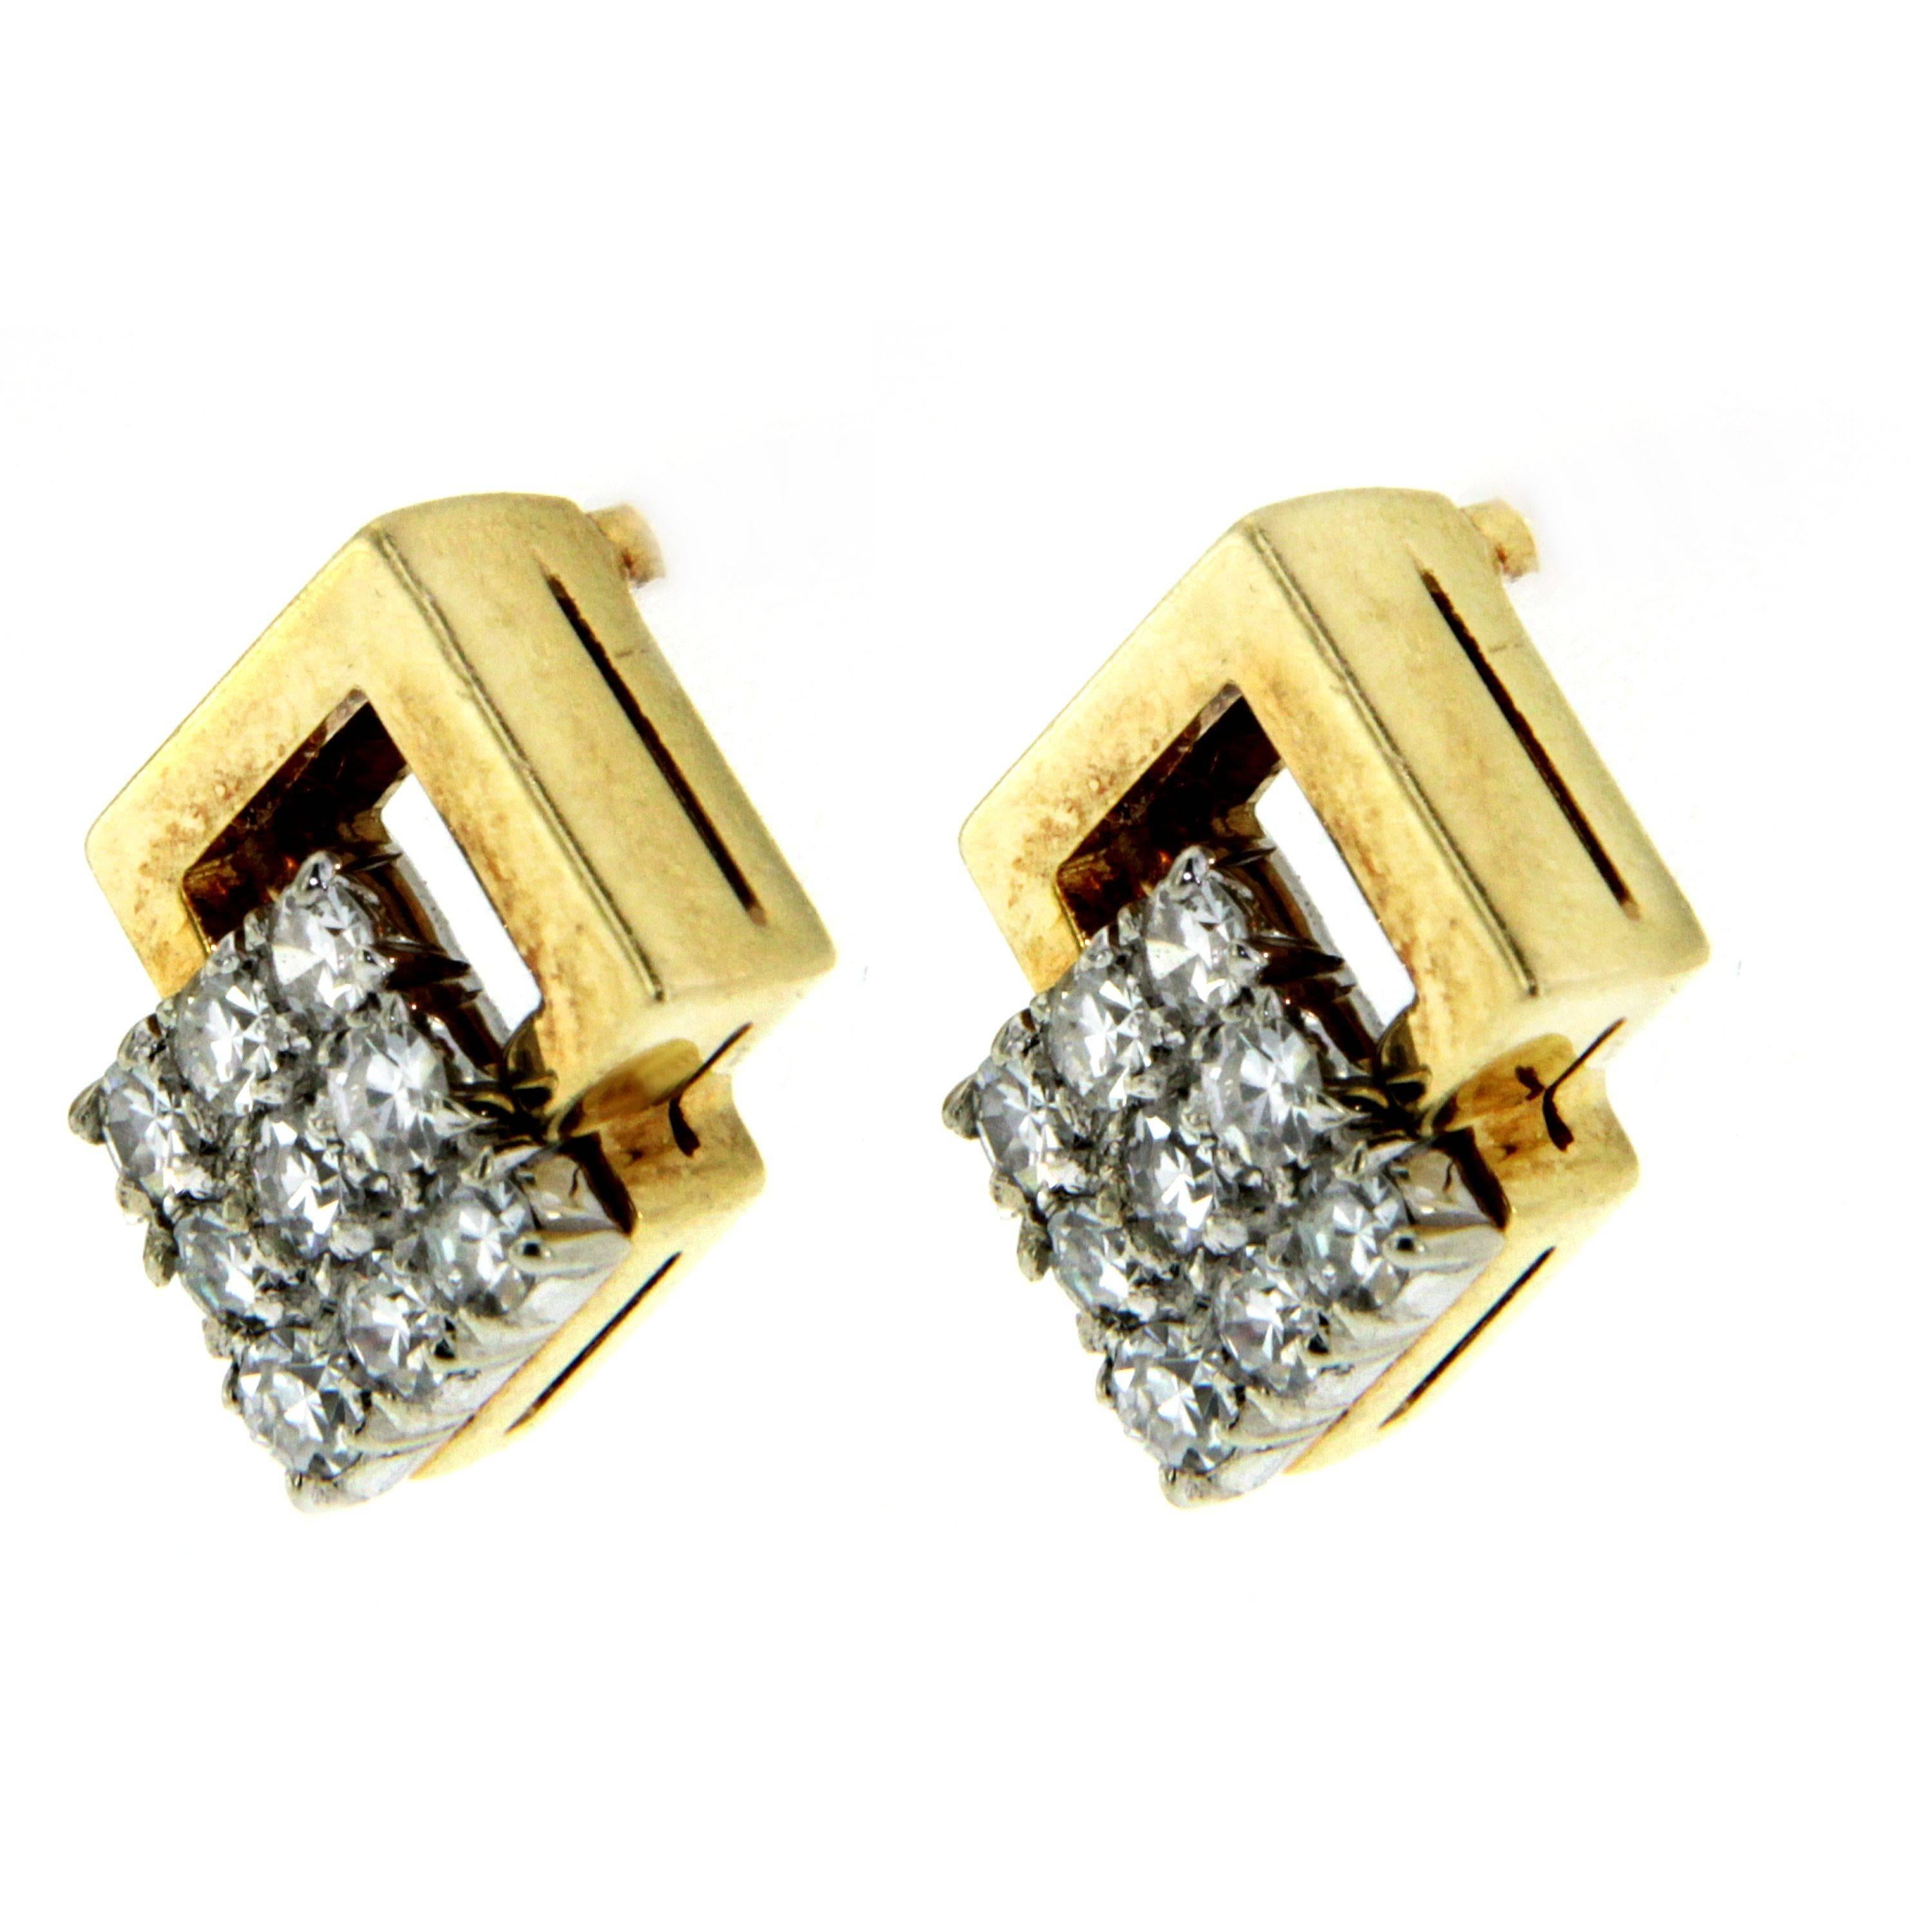 Fashion and smart these pair of earrings for sale, mounted in white and yellow 18k gold (stamped 750) set with 0,60 carat of sparkling diamonds tot. graded H color VS1
They featuring two overlapping squares, stud screw.

Made in Italy stamped